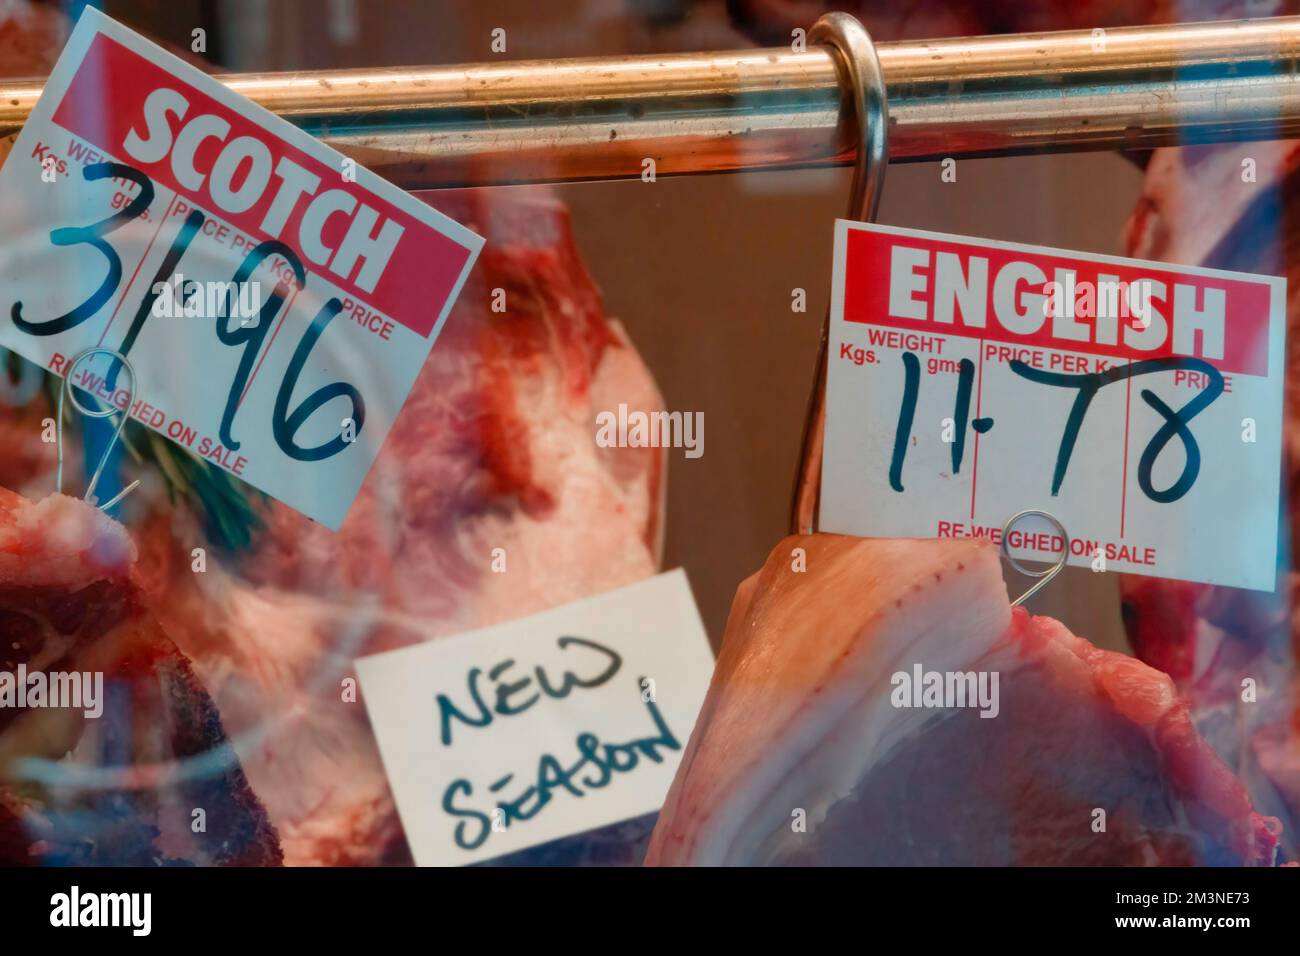 Window display of a British butcher showing various types of meat and their prices, London, UK Stock Photo